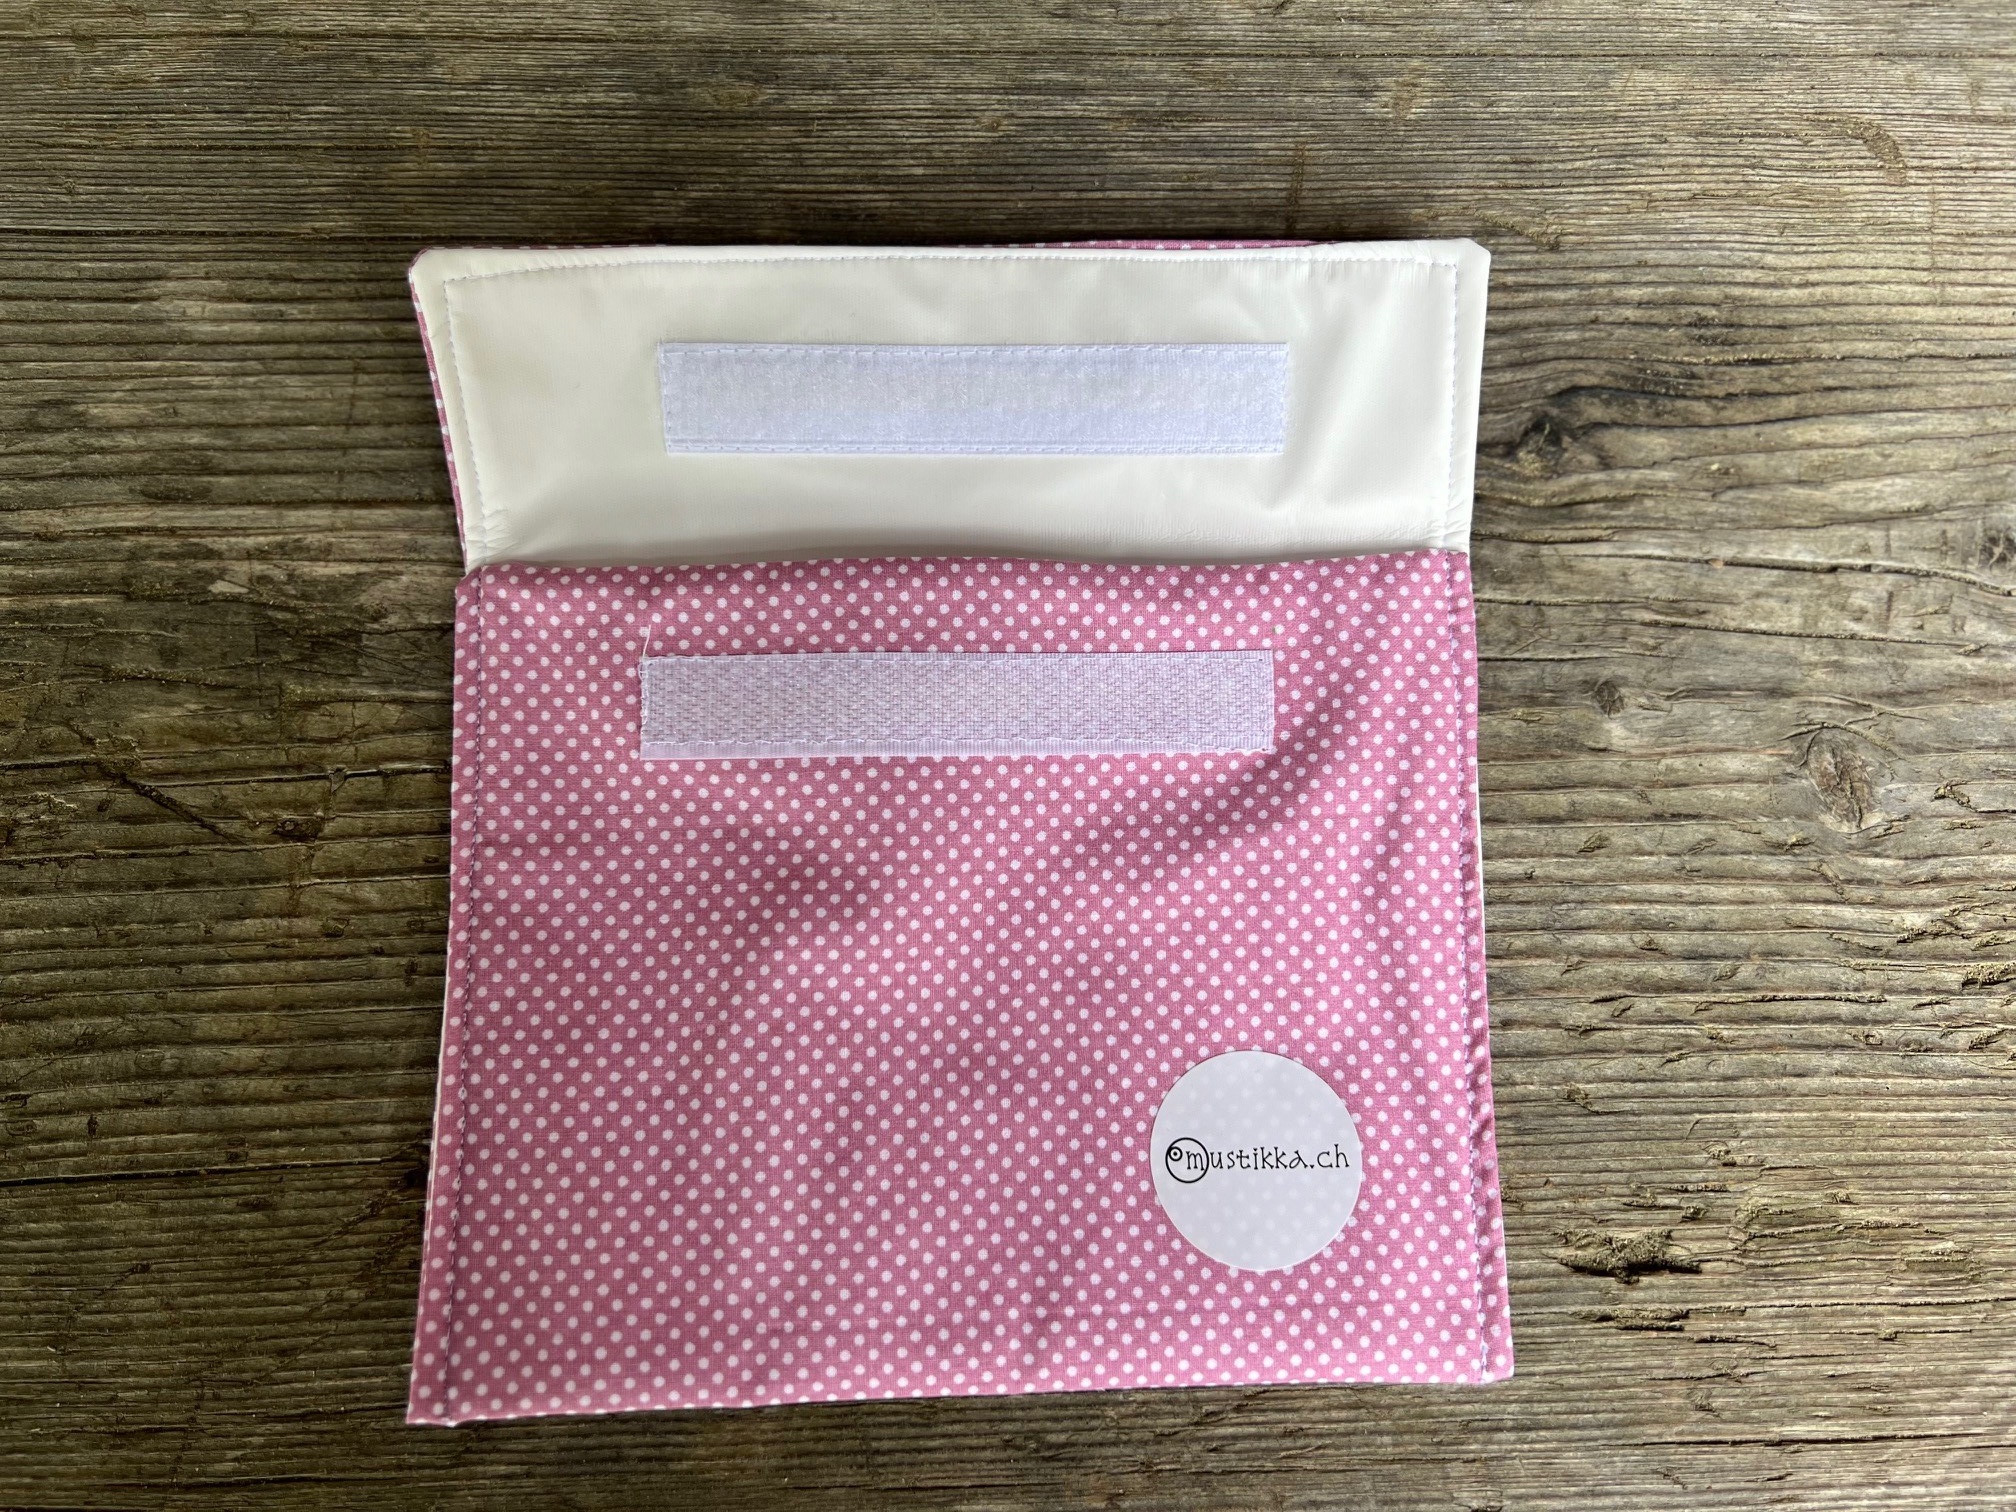 Snack bag pink coloured - upcycled material!